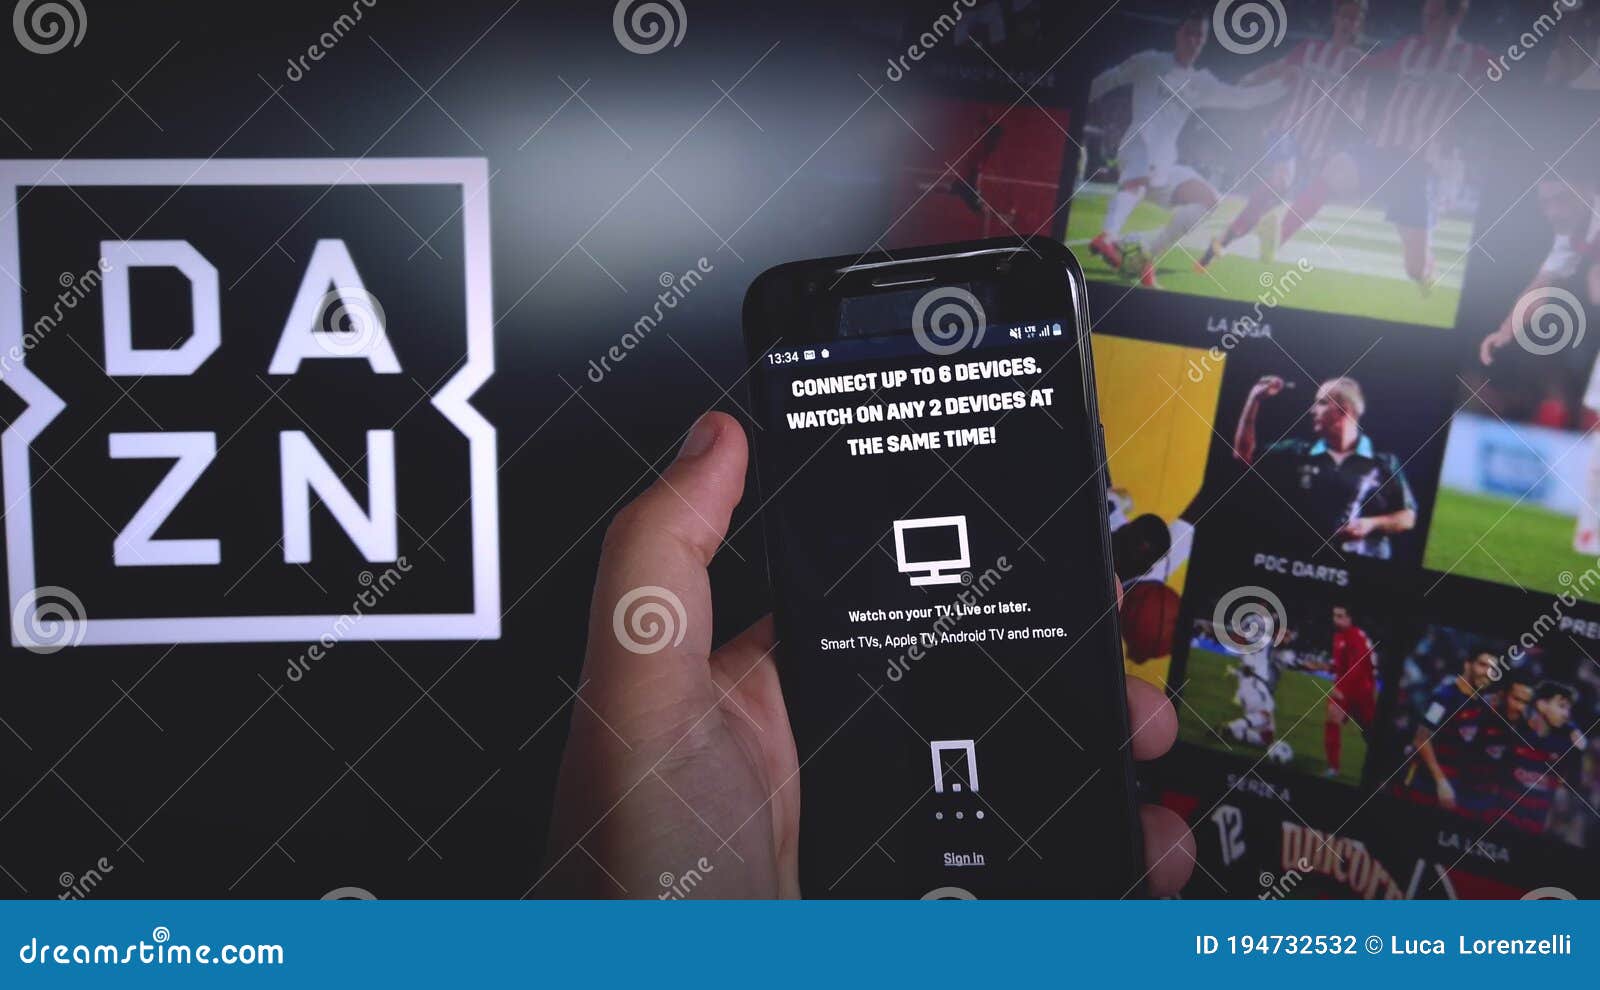 DAZN App for Mobile Phone with DAZN Background - DAZN is a Subscription Sports Streaming Service with on Demand and Live Stock Footage